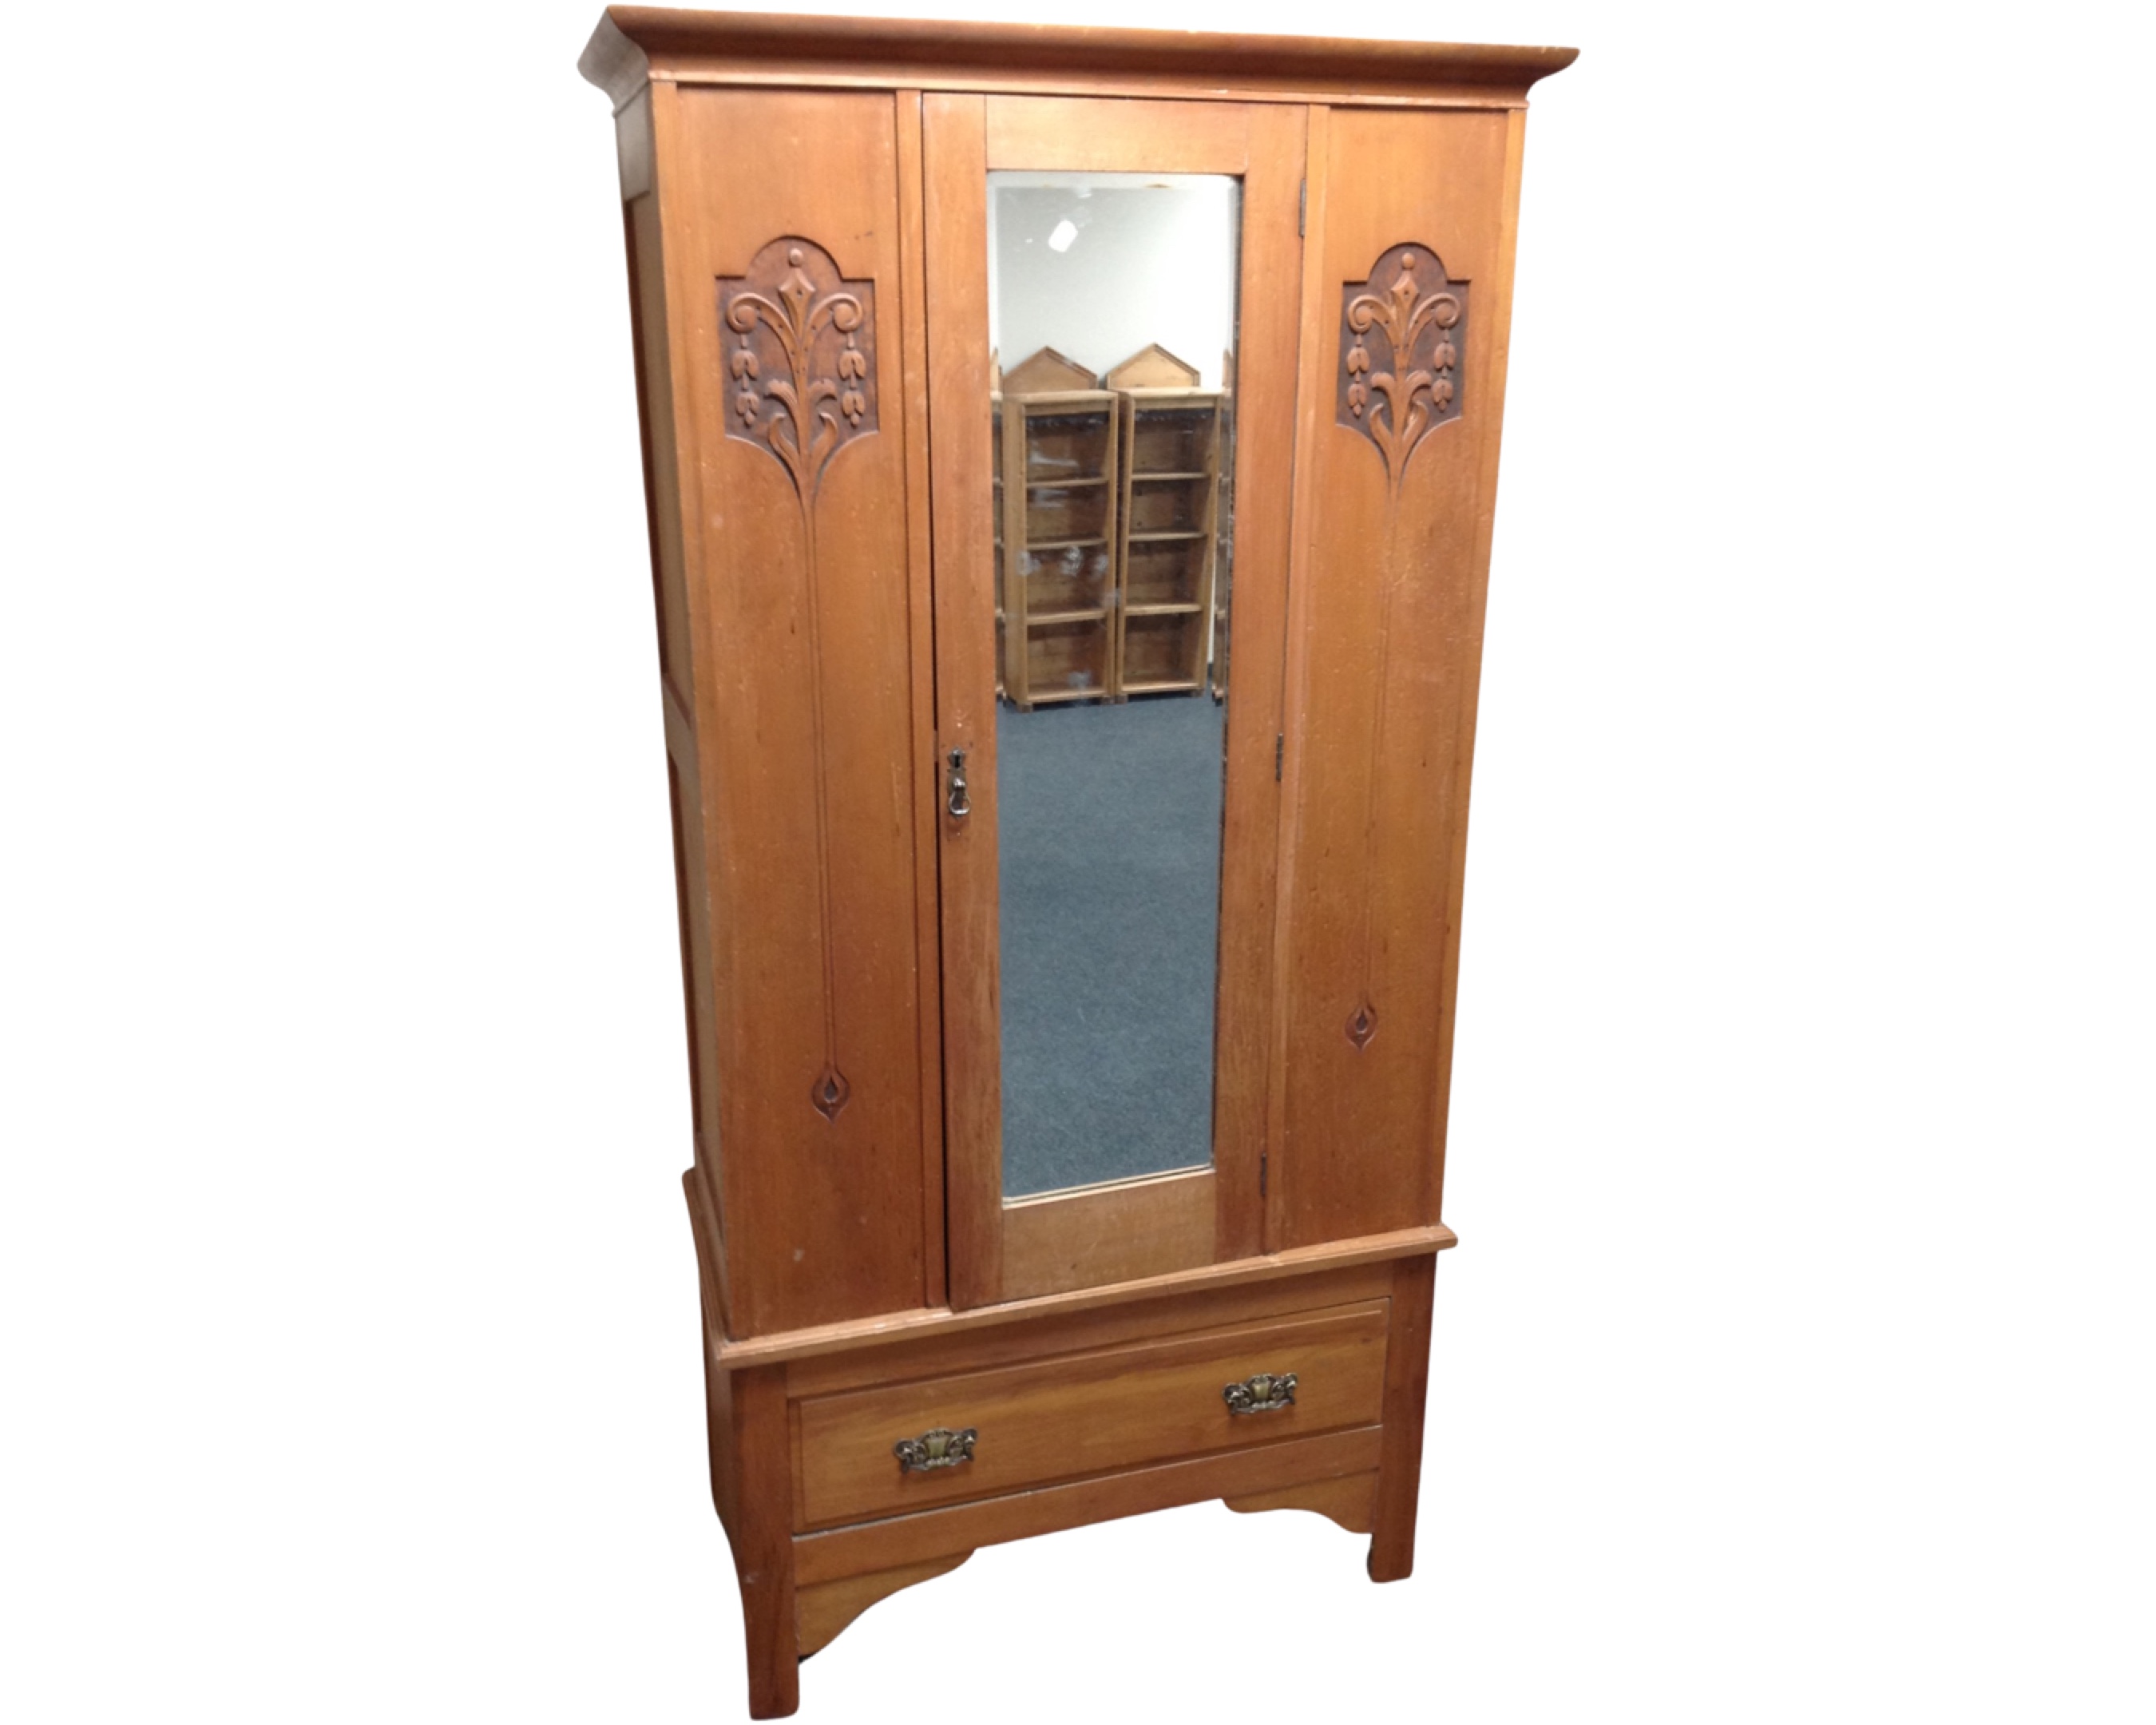 A satinwood Arts & Crafts mirror door wardrobe fitted with a drawer